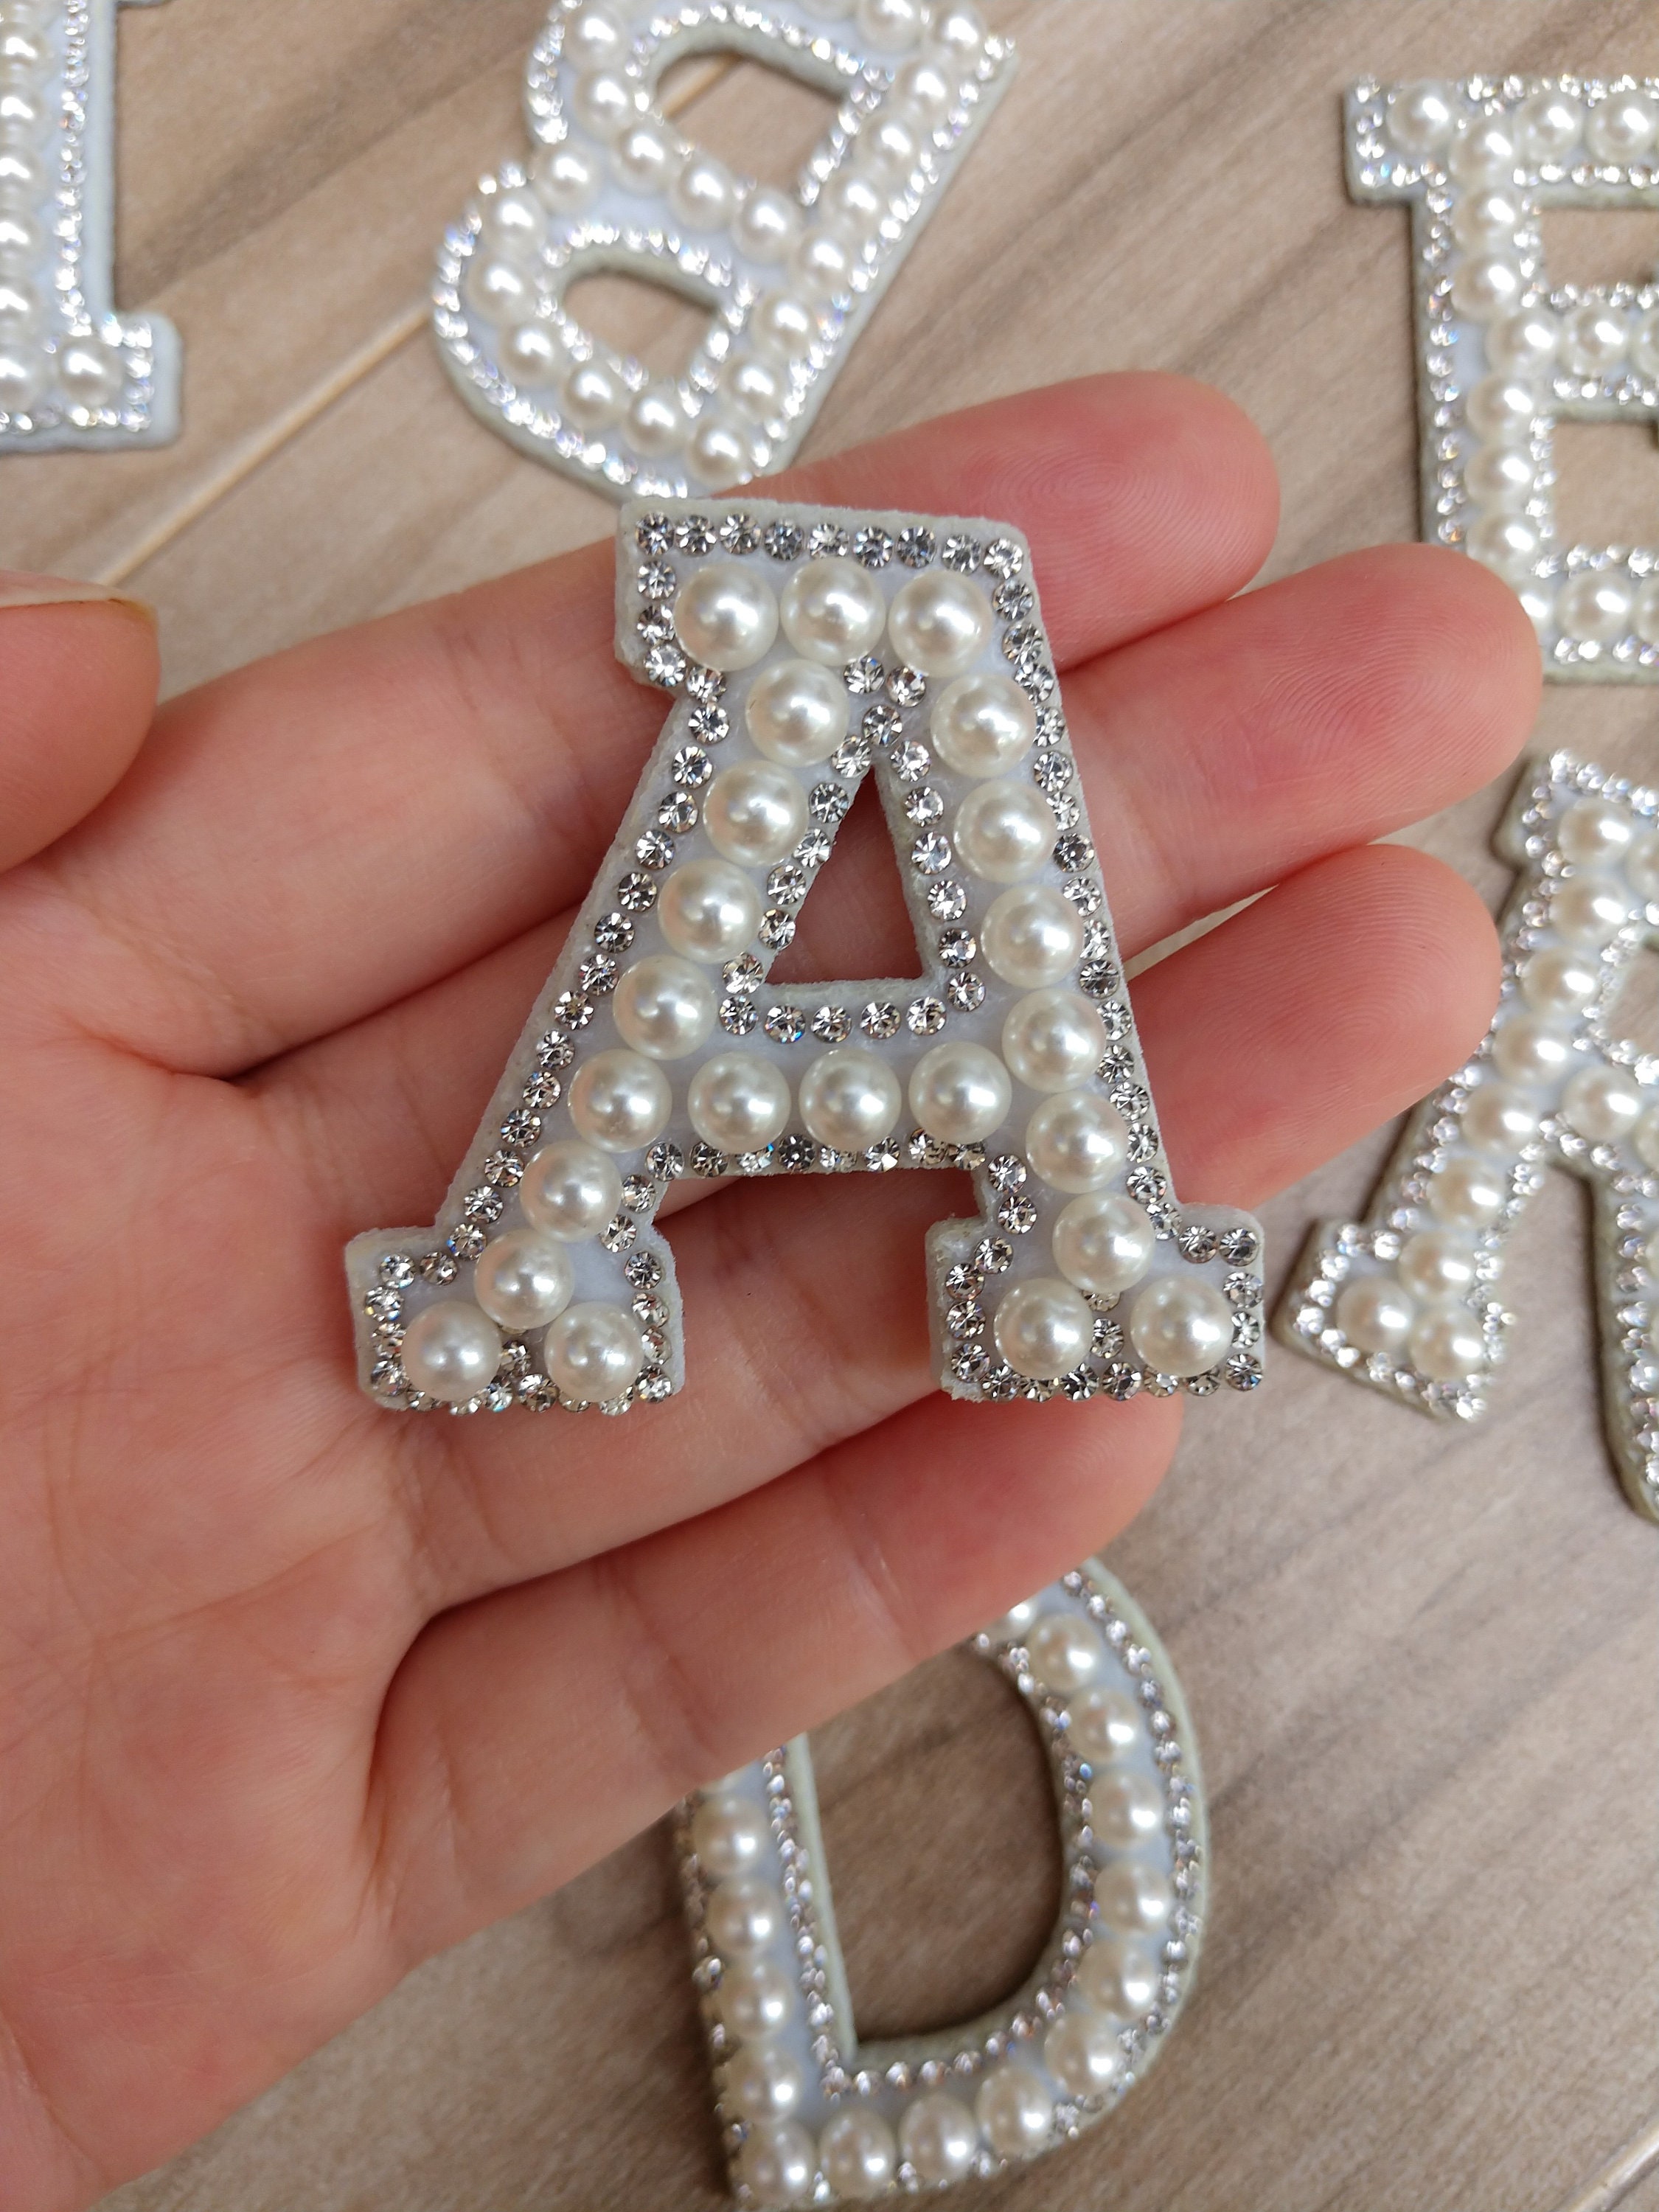 Reduced！！52pcs Applique Letter Patch Iron On Rhinestones For